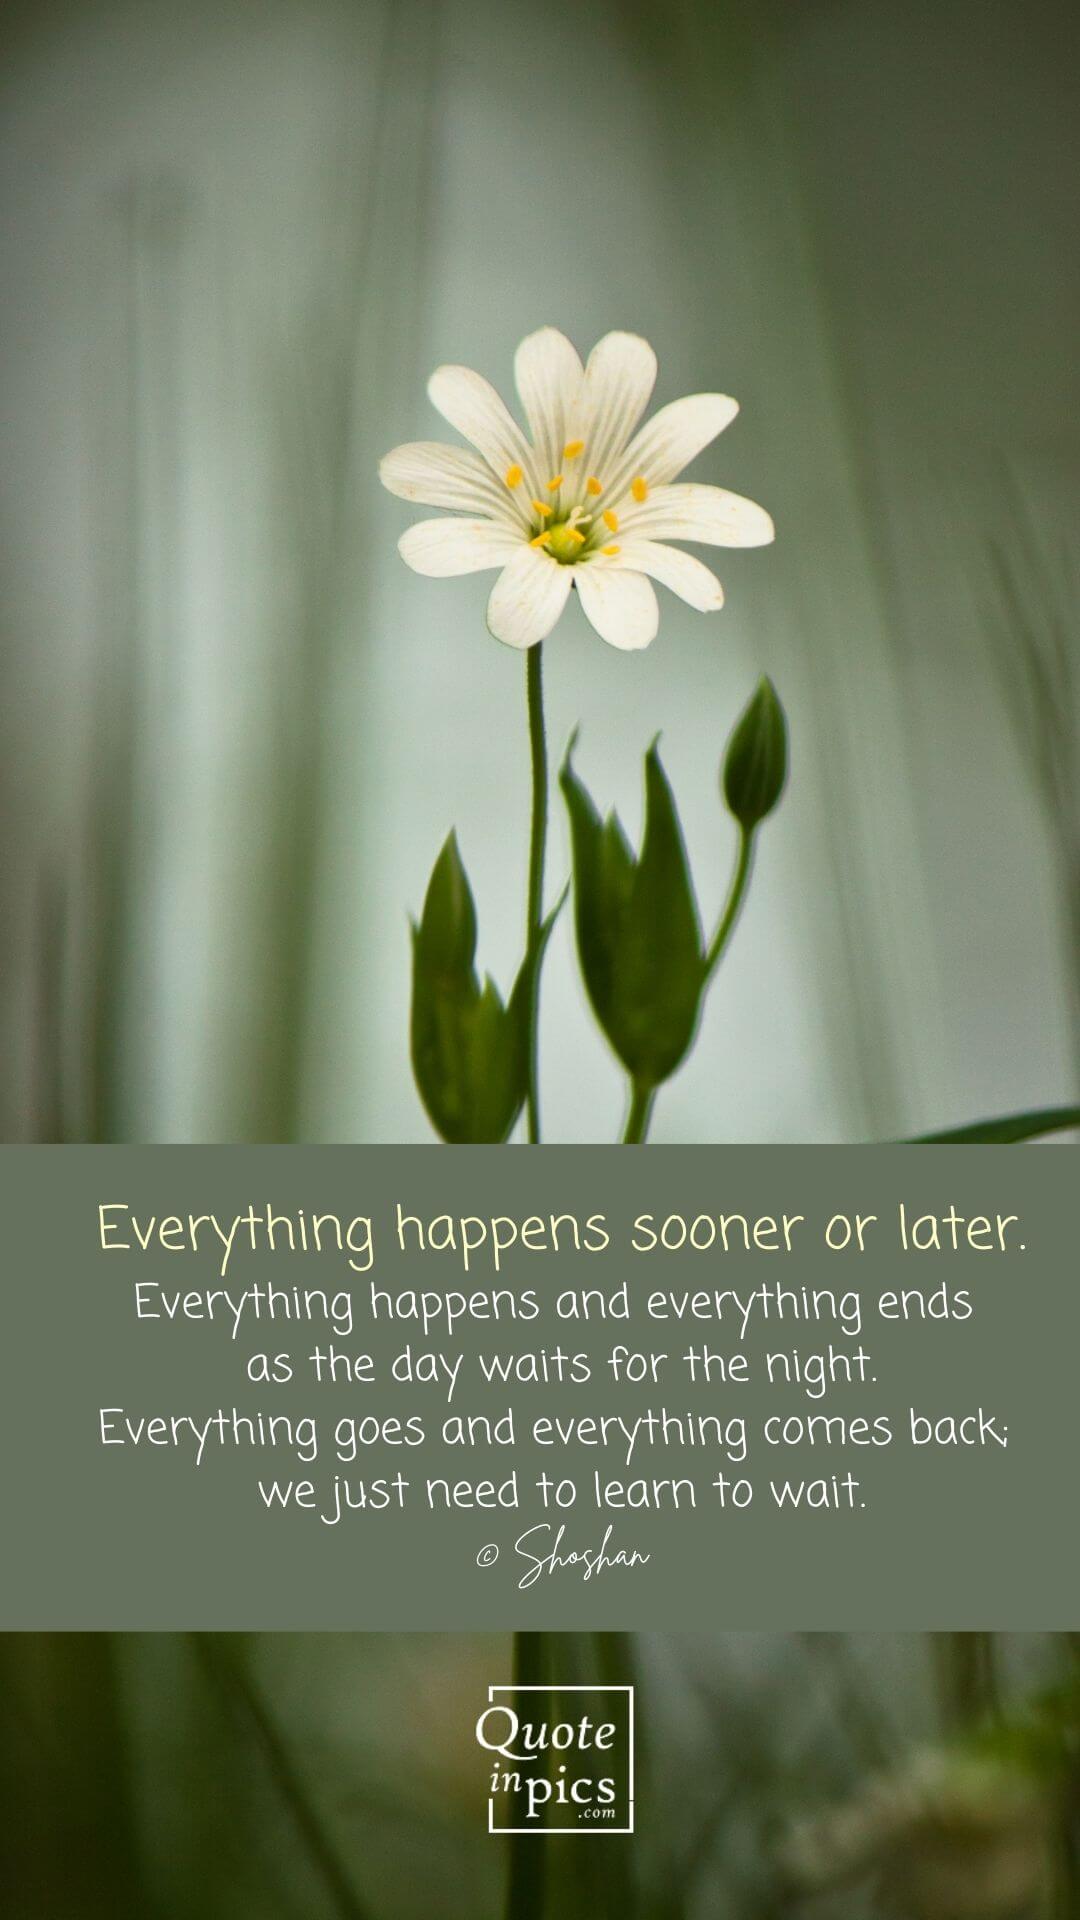 Everything happens sooner or later